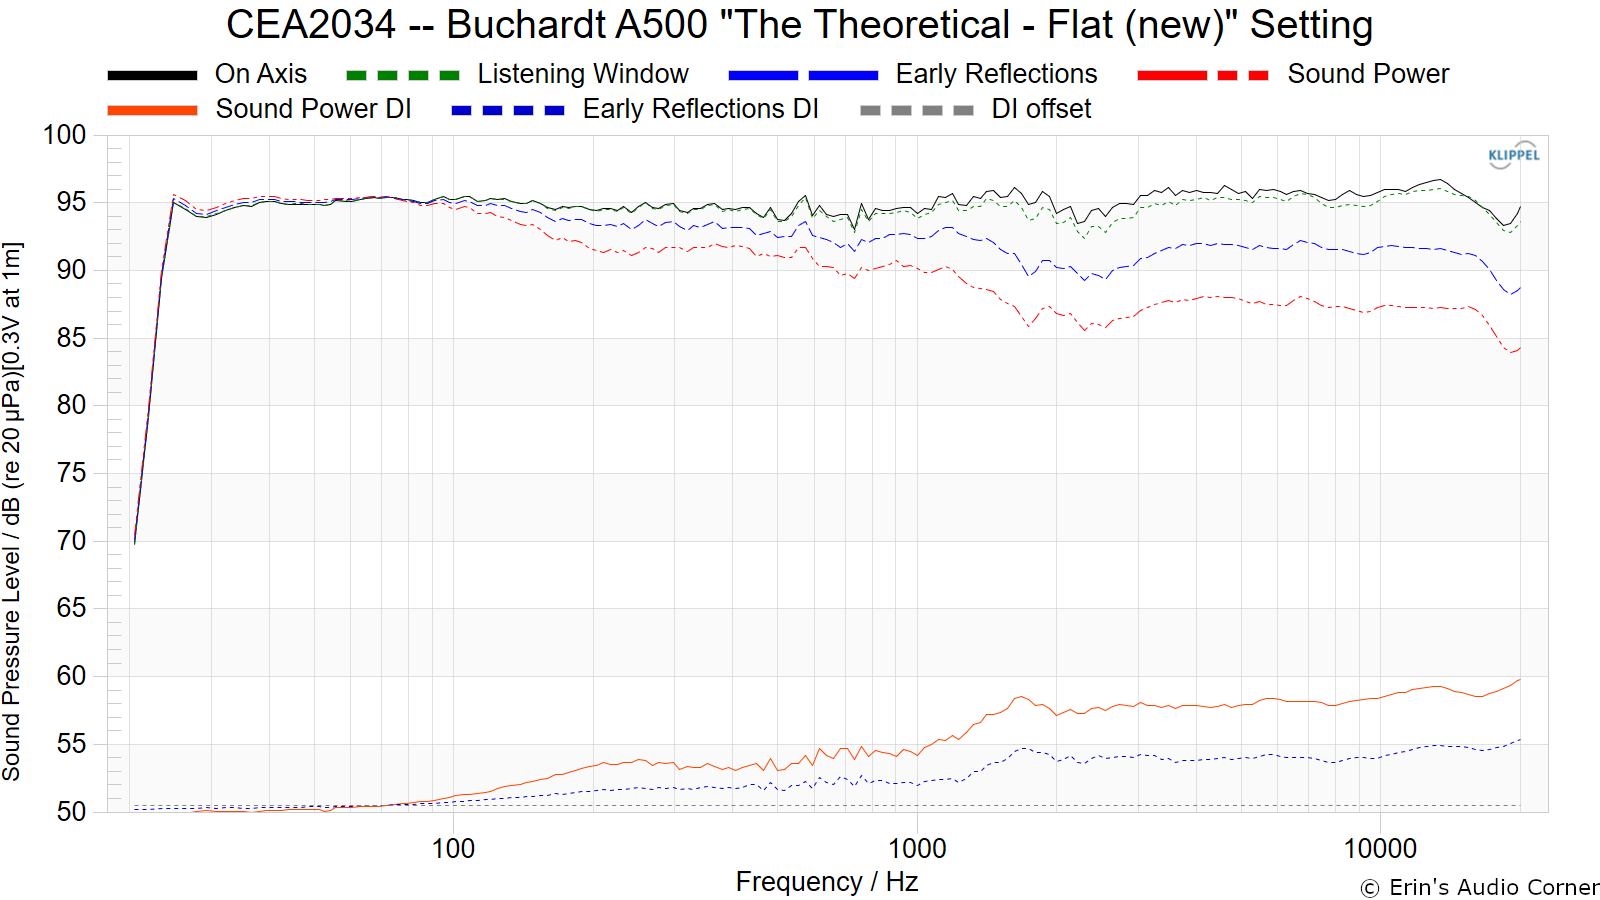 CEA2034 -- Buchardt A500 The Theoretical - Flat (new) Setting (1).png